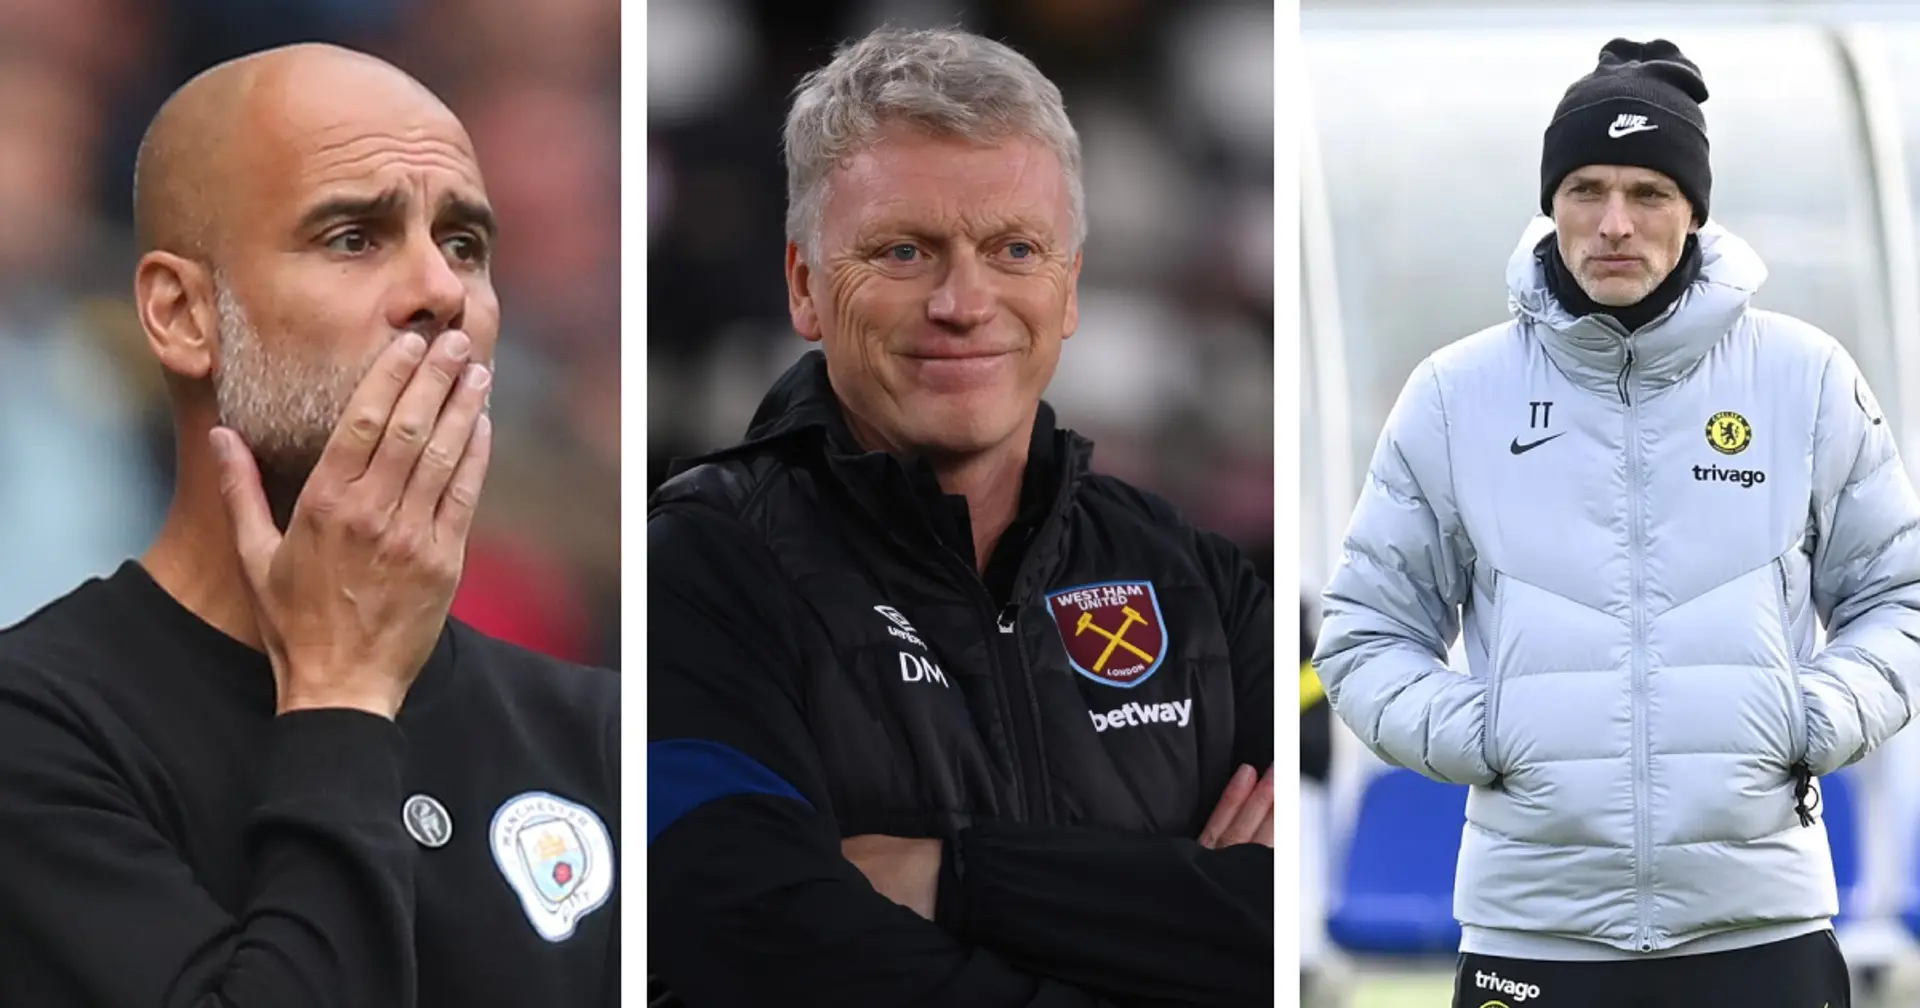 Jack Wilshere: David Moyes is top tier manager, like Tuchel, Guardiola and Klopp